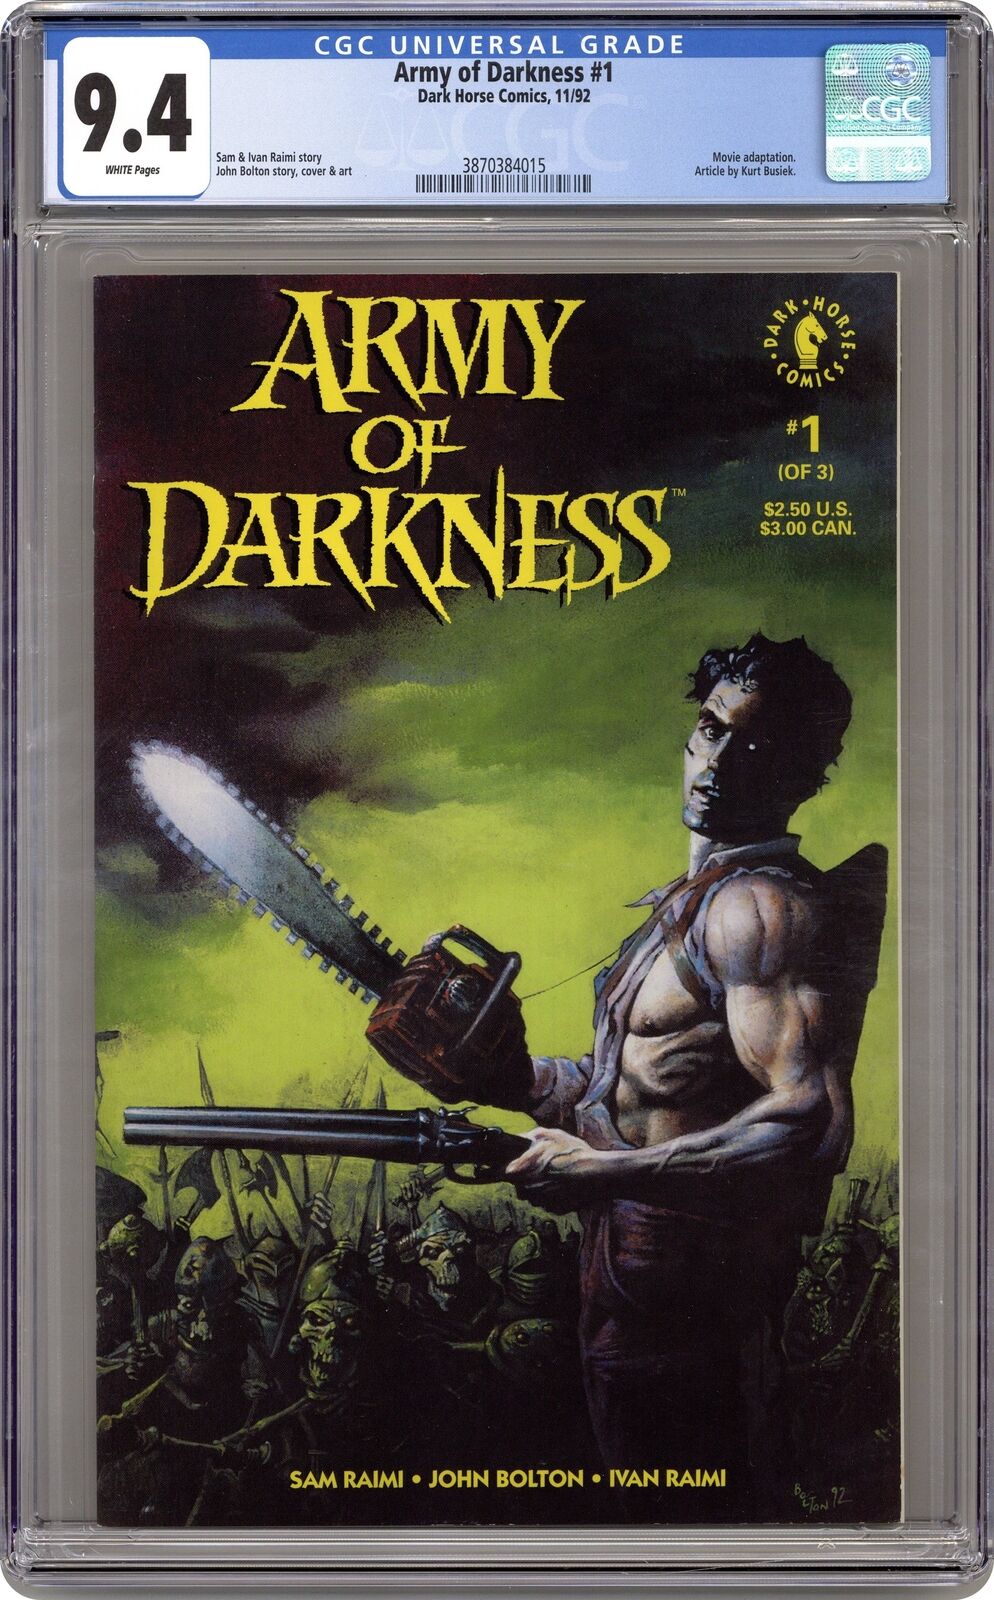 Army of Darkness #1 CGC 9.4 1992 3870384015